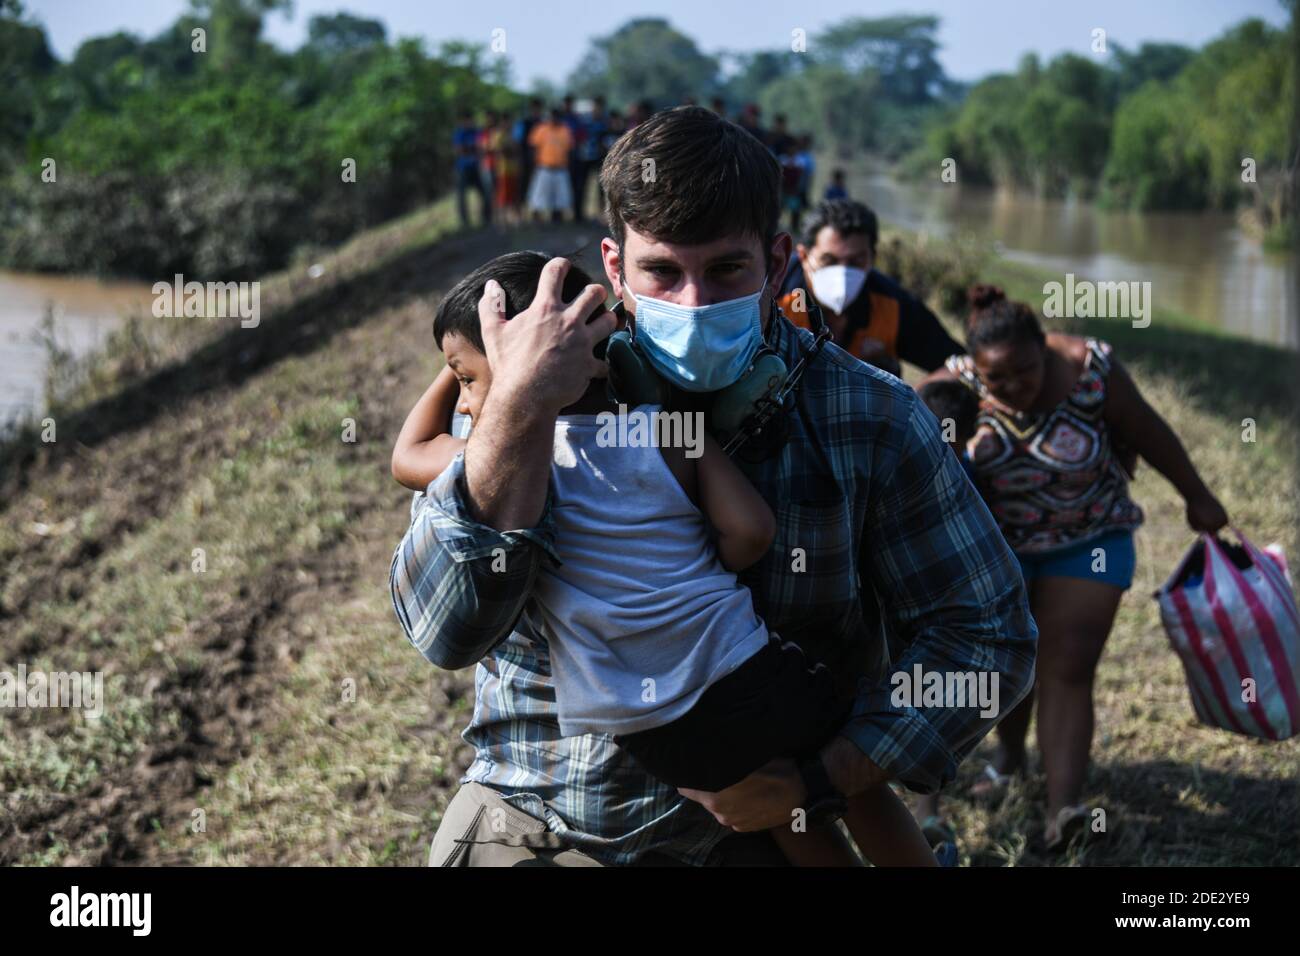 A U.S. Army soldier carries a Honduran child to a HH-60 Black Hawk helicopter for evacuation following a massive hurricane November 10, 2020 in Choloma, Honduras. Hurricane Eta swept through Central America destroying large sections of the coast and flooding roads. Stock Photo